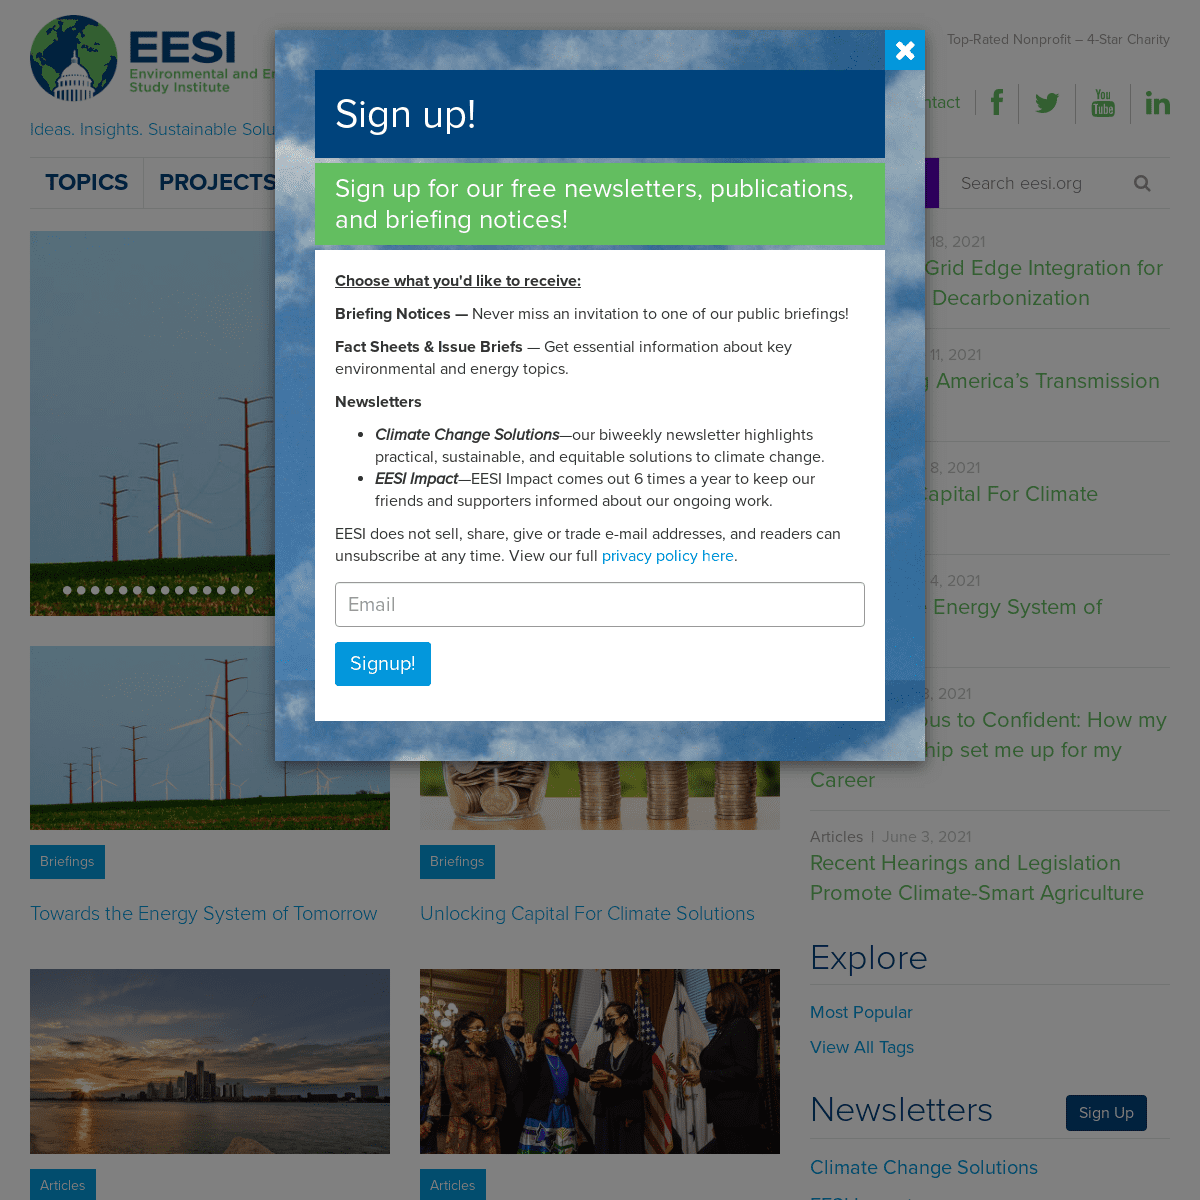 A complete backup of https://eesi.org